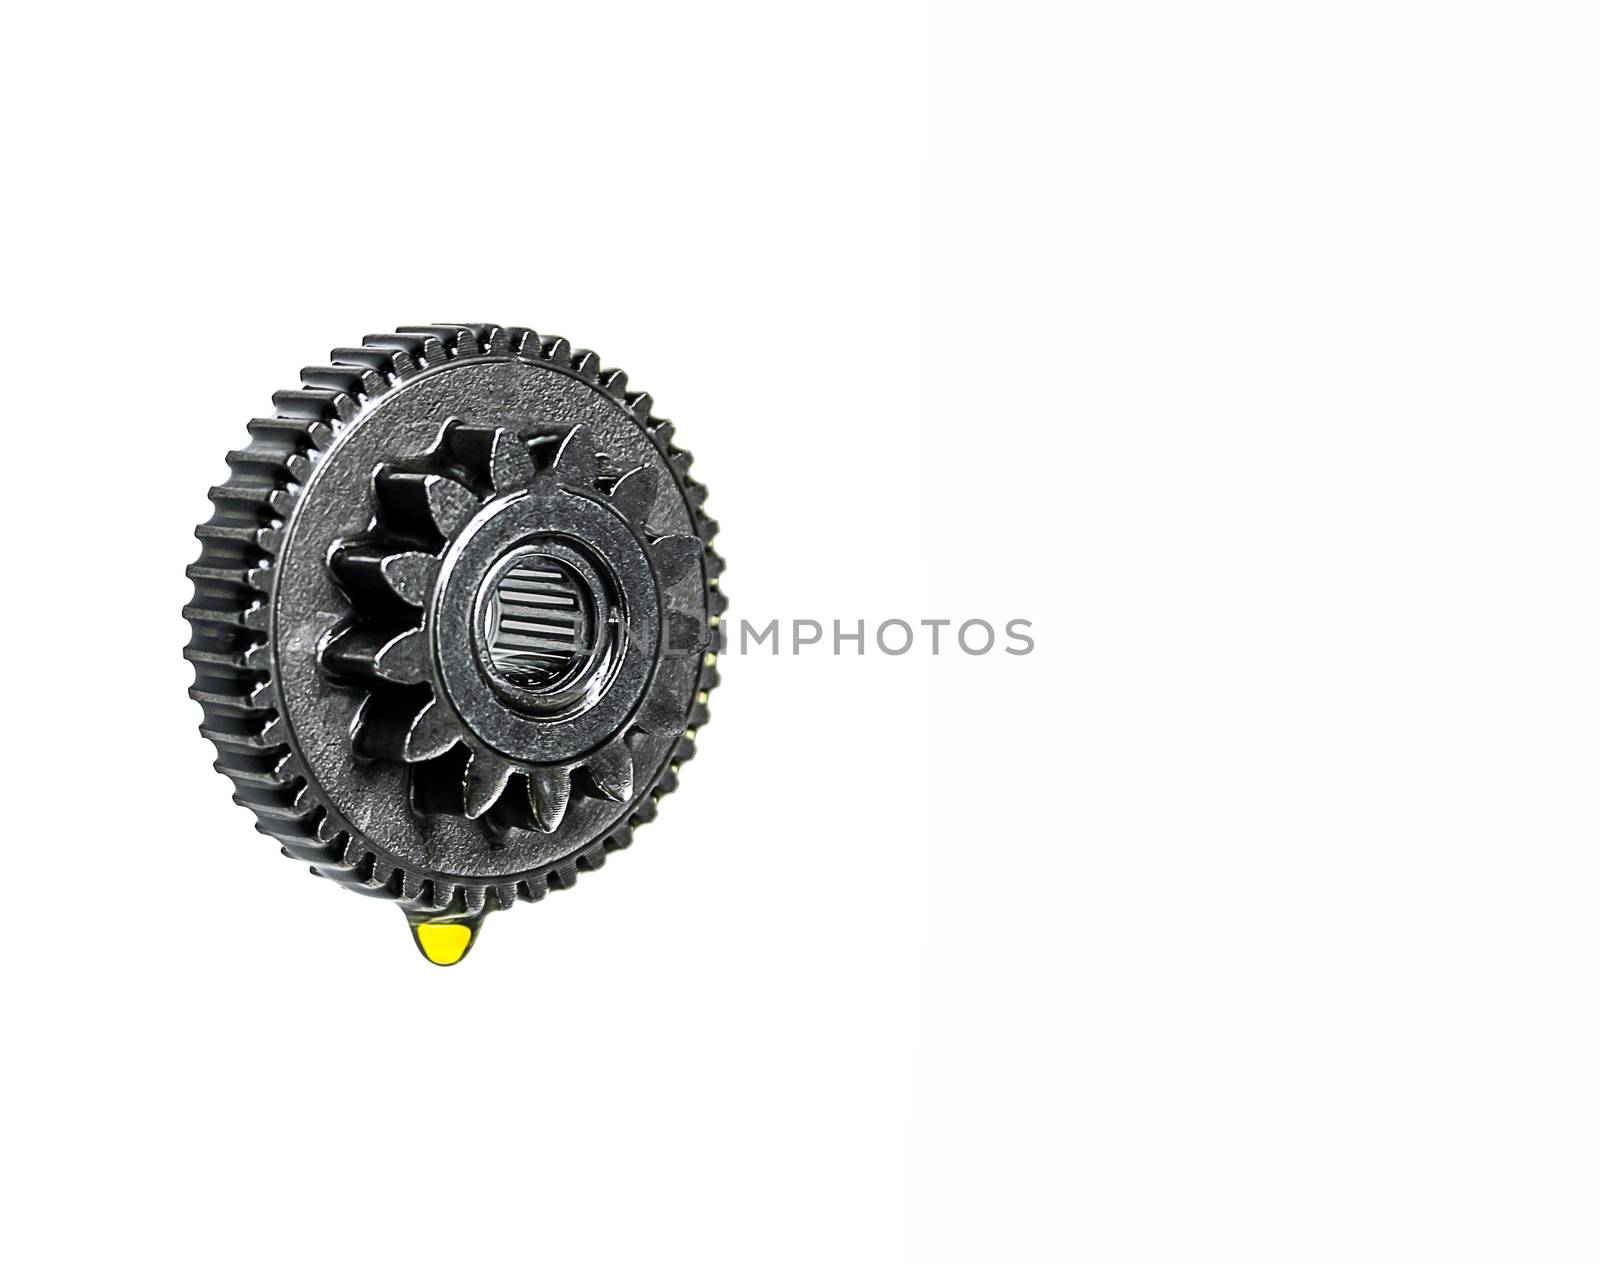 Gear and bearing industry in lubricant oiling a white background by sompongtom